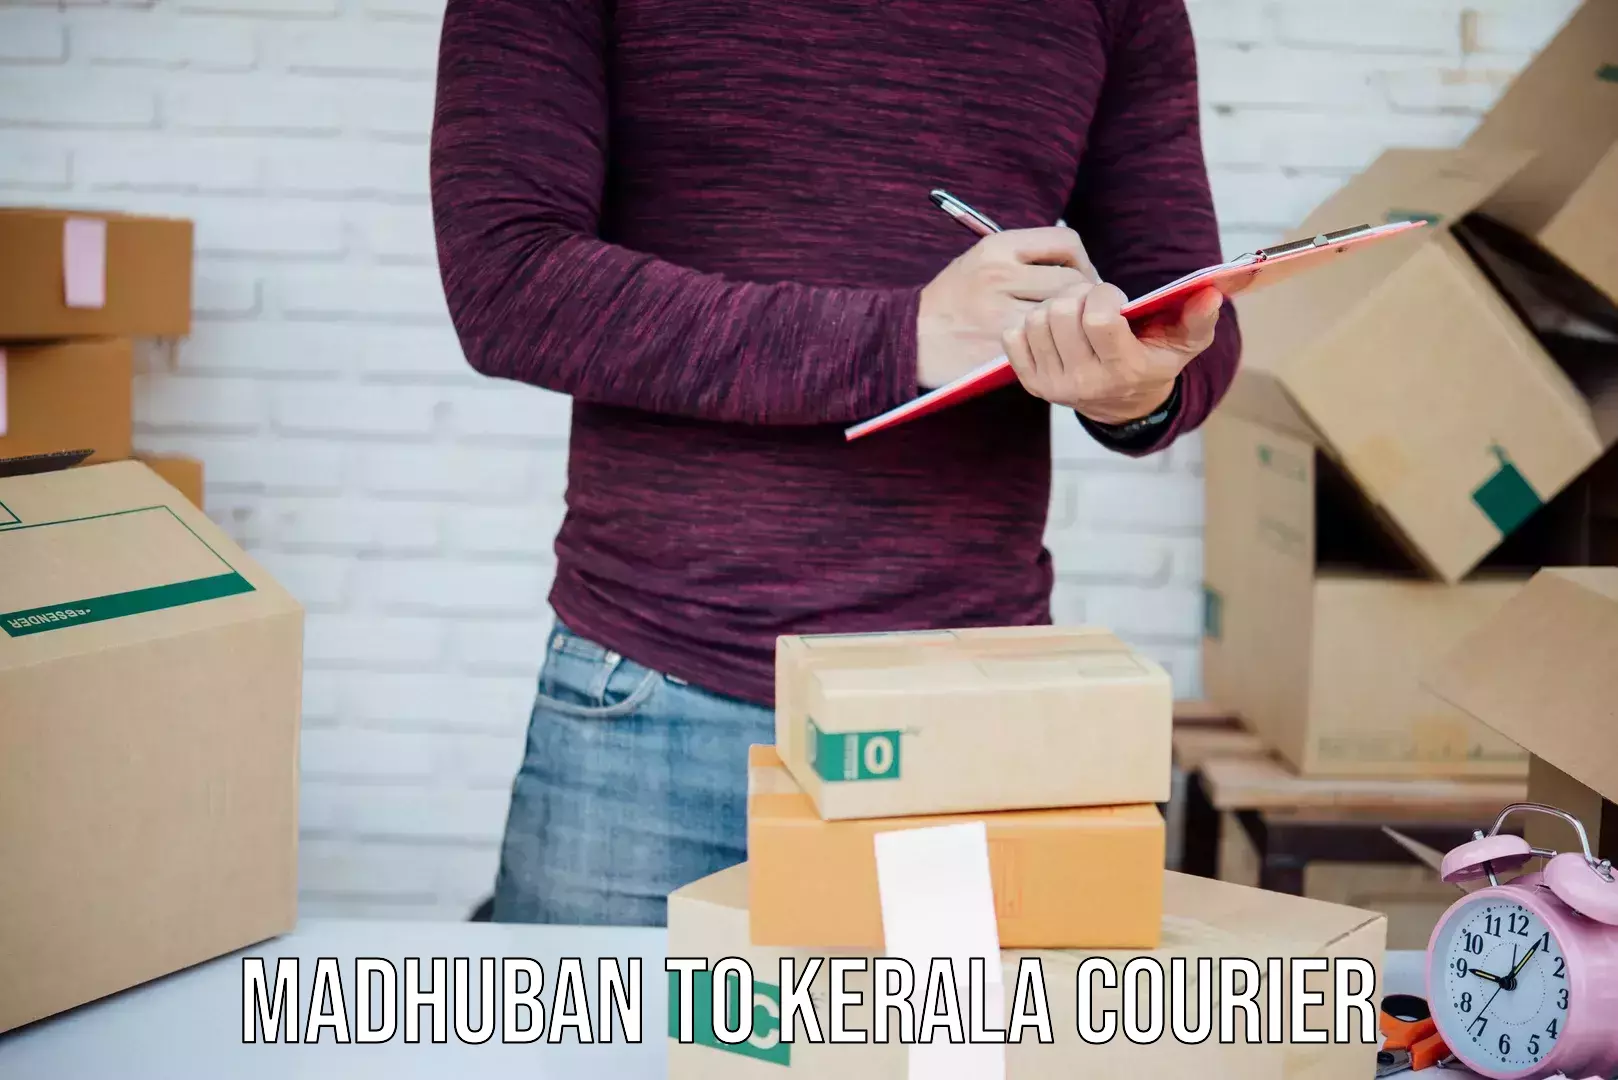 Courier service efficiency Madhuban to Kerala